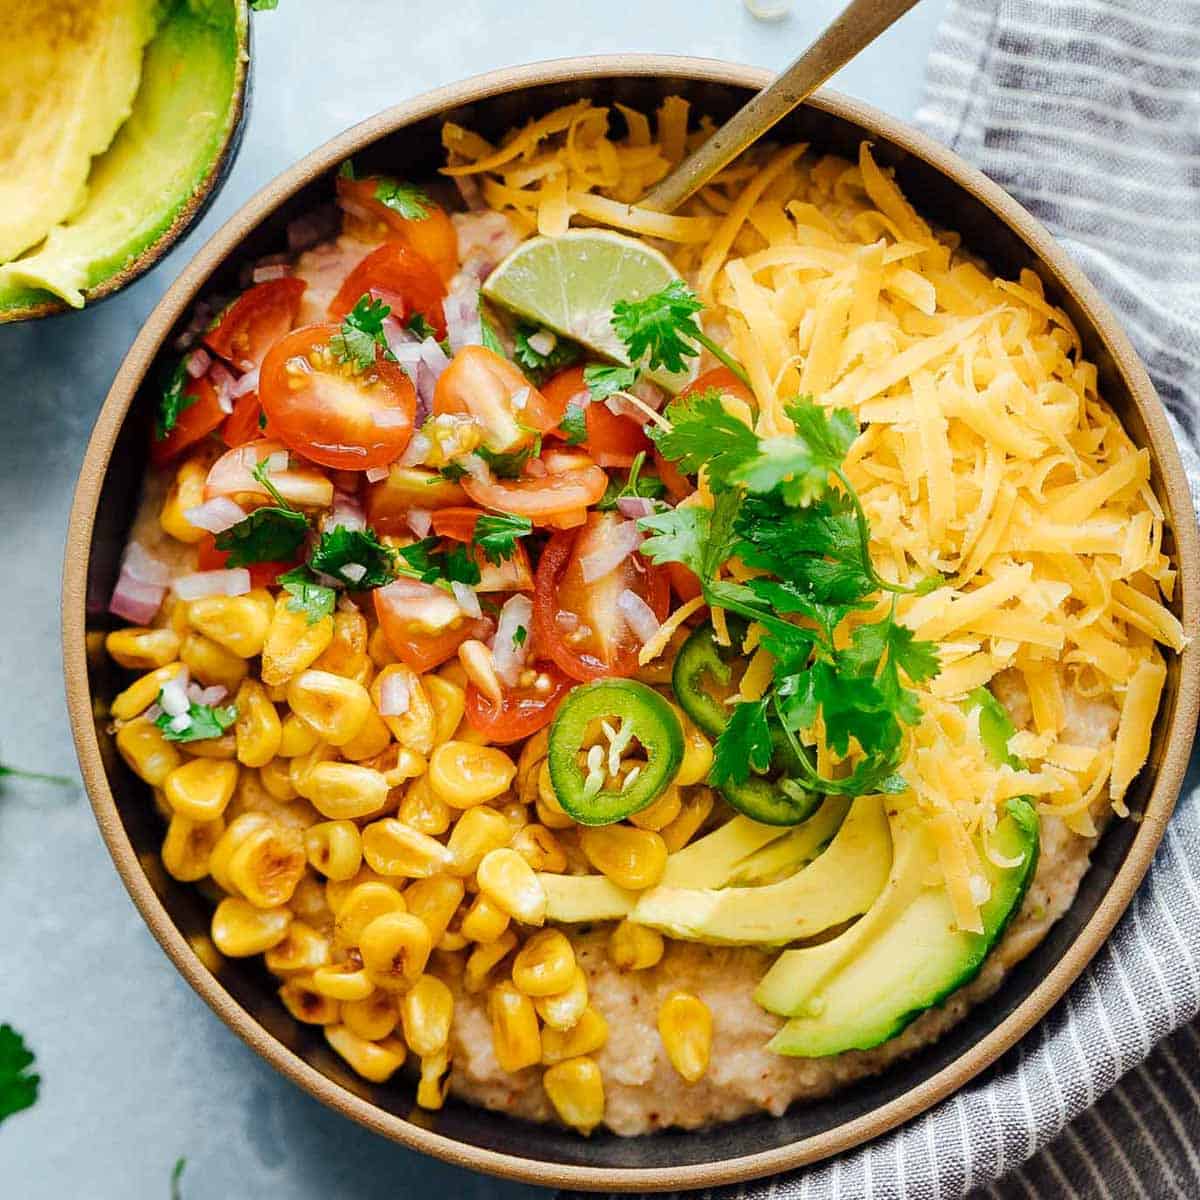 This Mexican oatmeal bowl is the healthier version of a Mexican breakfast bowl. The oatmeal is seasoned with all the spices that go into your favorite taco, and then topped with salsa, corn, avocado, jalapenos and cheddar. Super simple to make but you’ll feel like a king when you dig into this!